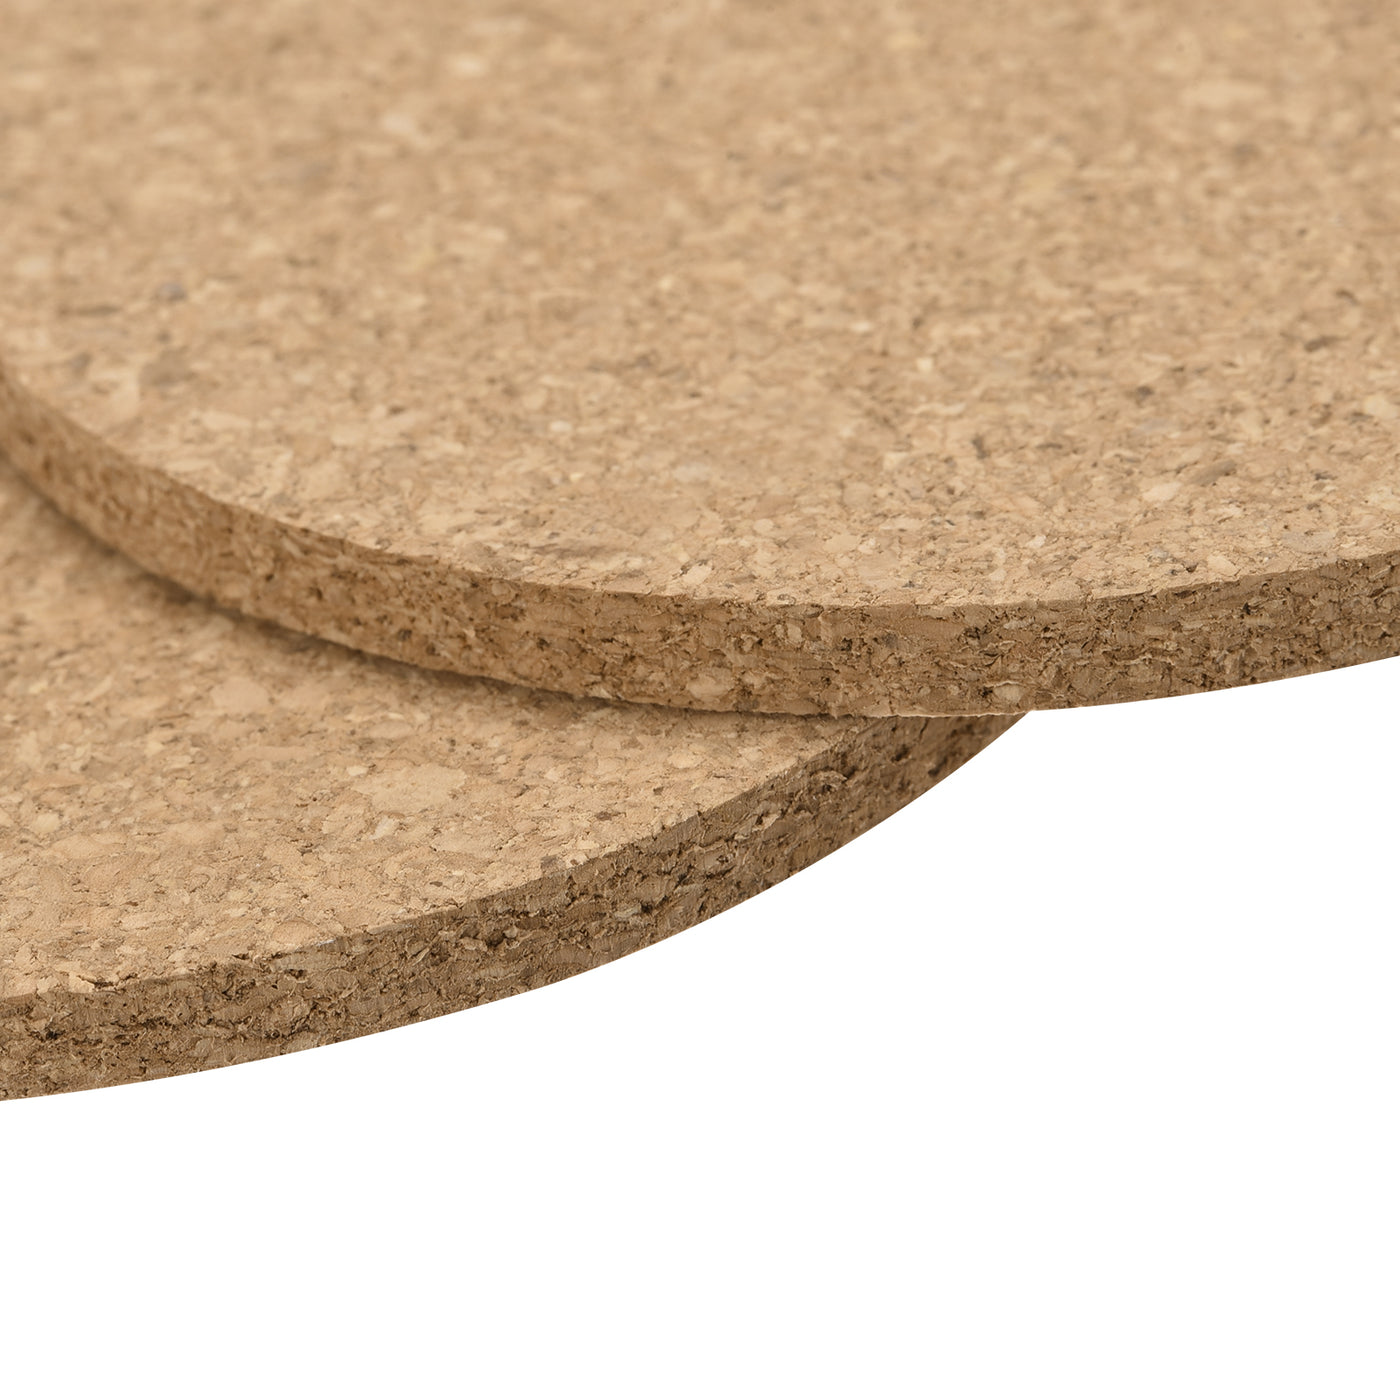 uxcell Uxcell 100mm(3.94") Round Coasters 5mm Thick Cork Cup Mat Pad for Tableware 4pcs